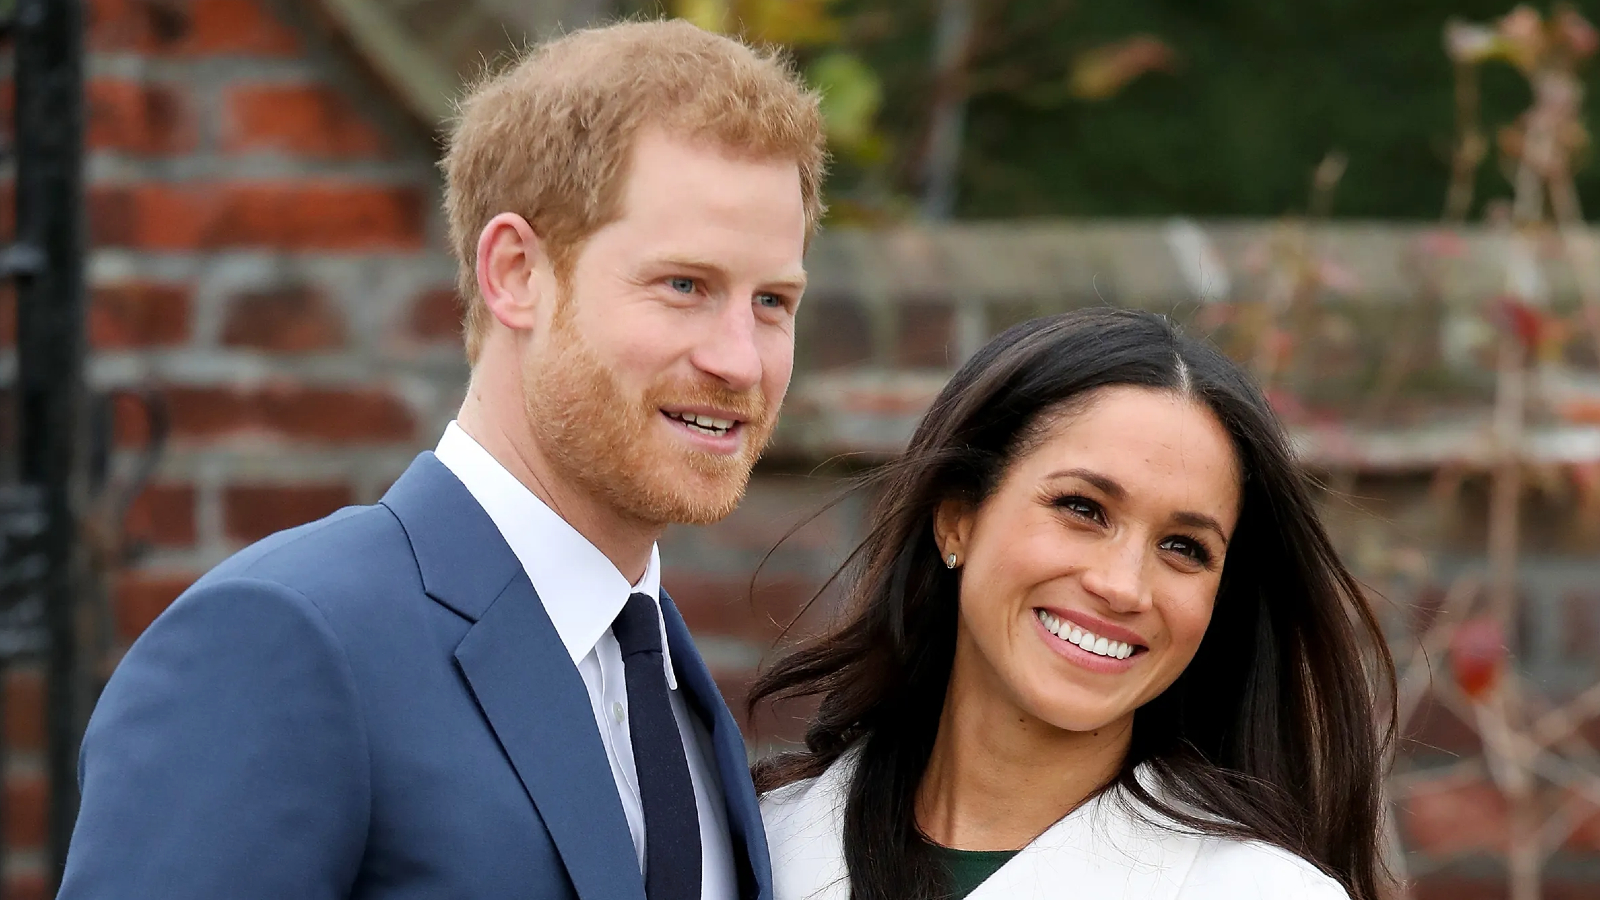 ‘Spare’: Prince Harry details the moment Meghan Markle encouraged him to try therapy again